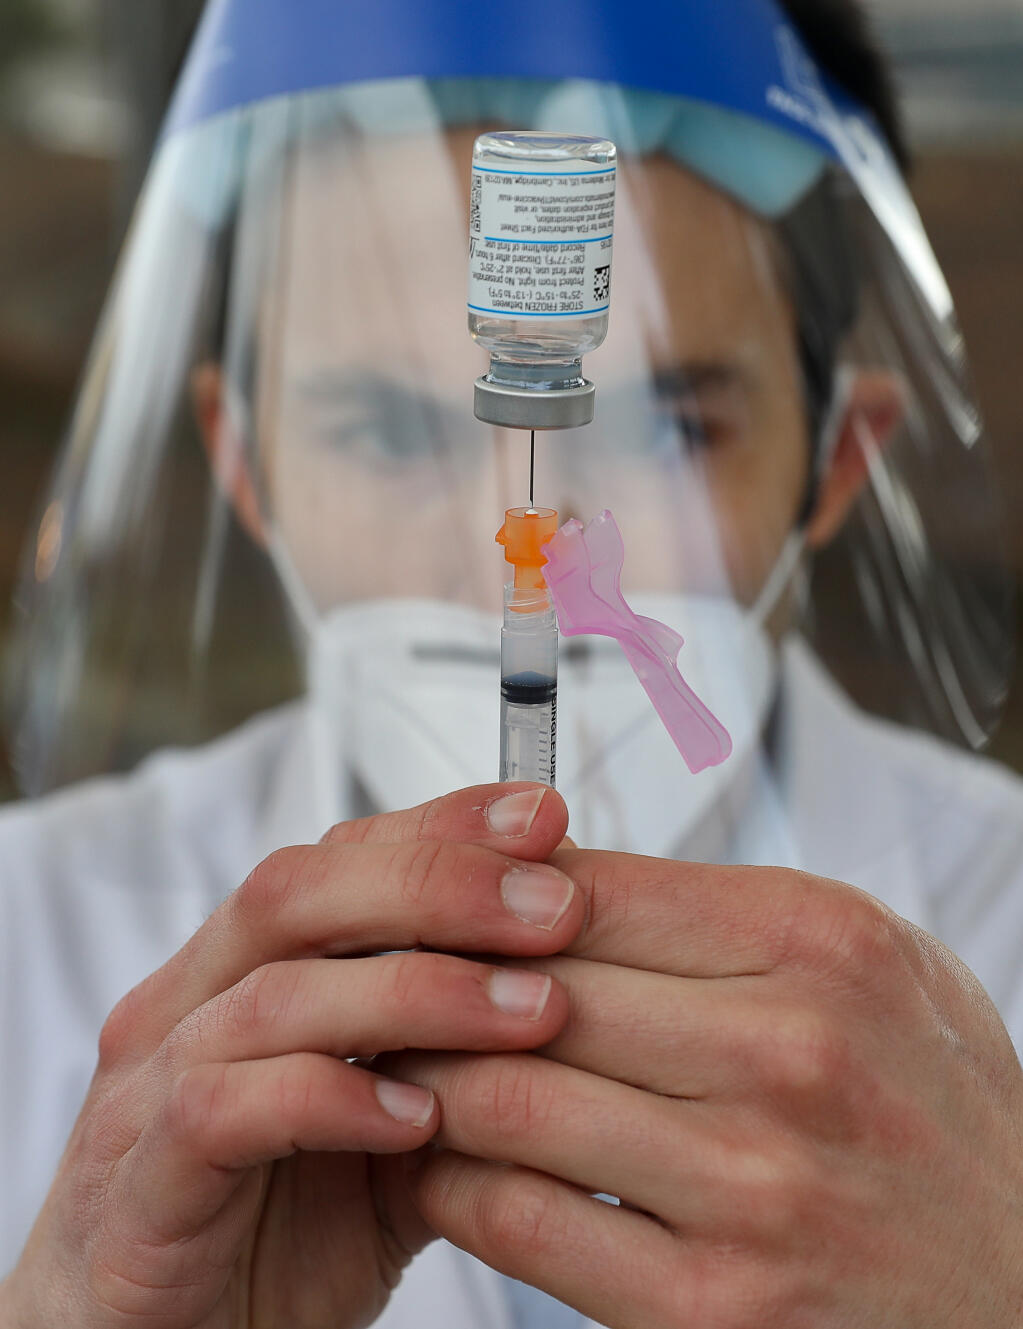 Safeway pharmacy manager Gunner Olsen prepares a syringe with the Moderna COVID-19 vaccination in Santa Rosa on Wednesday, Jan. 13, 2021. (Christopher Chung / The Press Democrat)